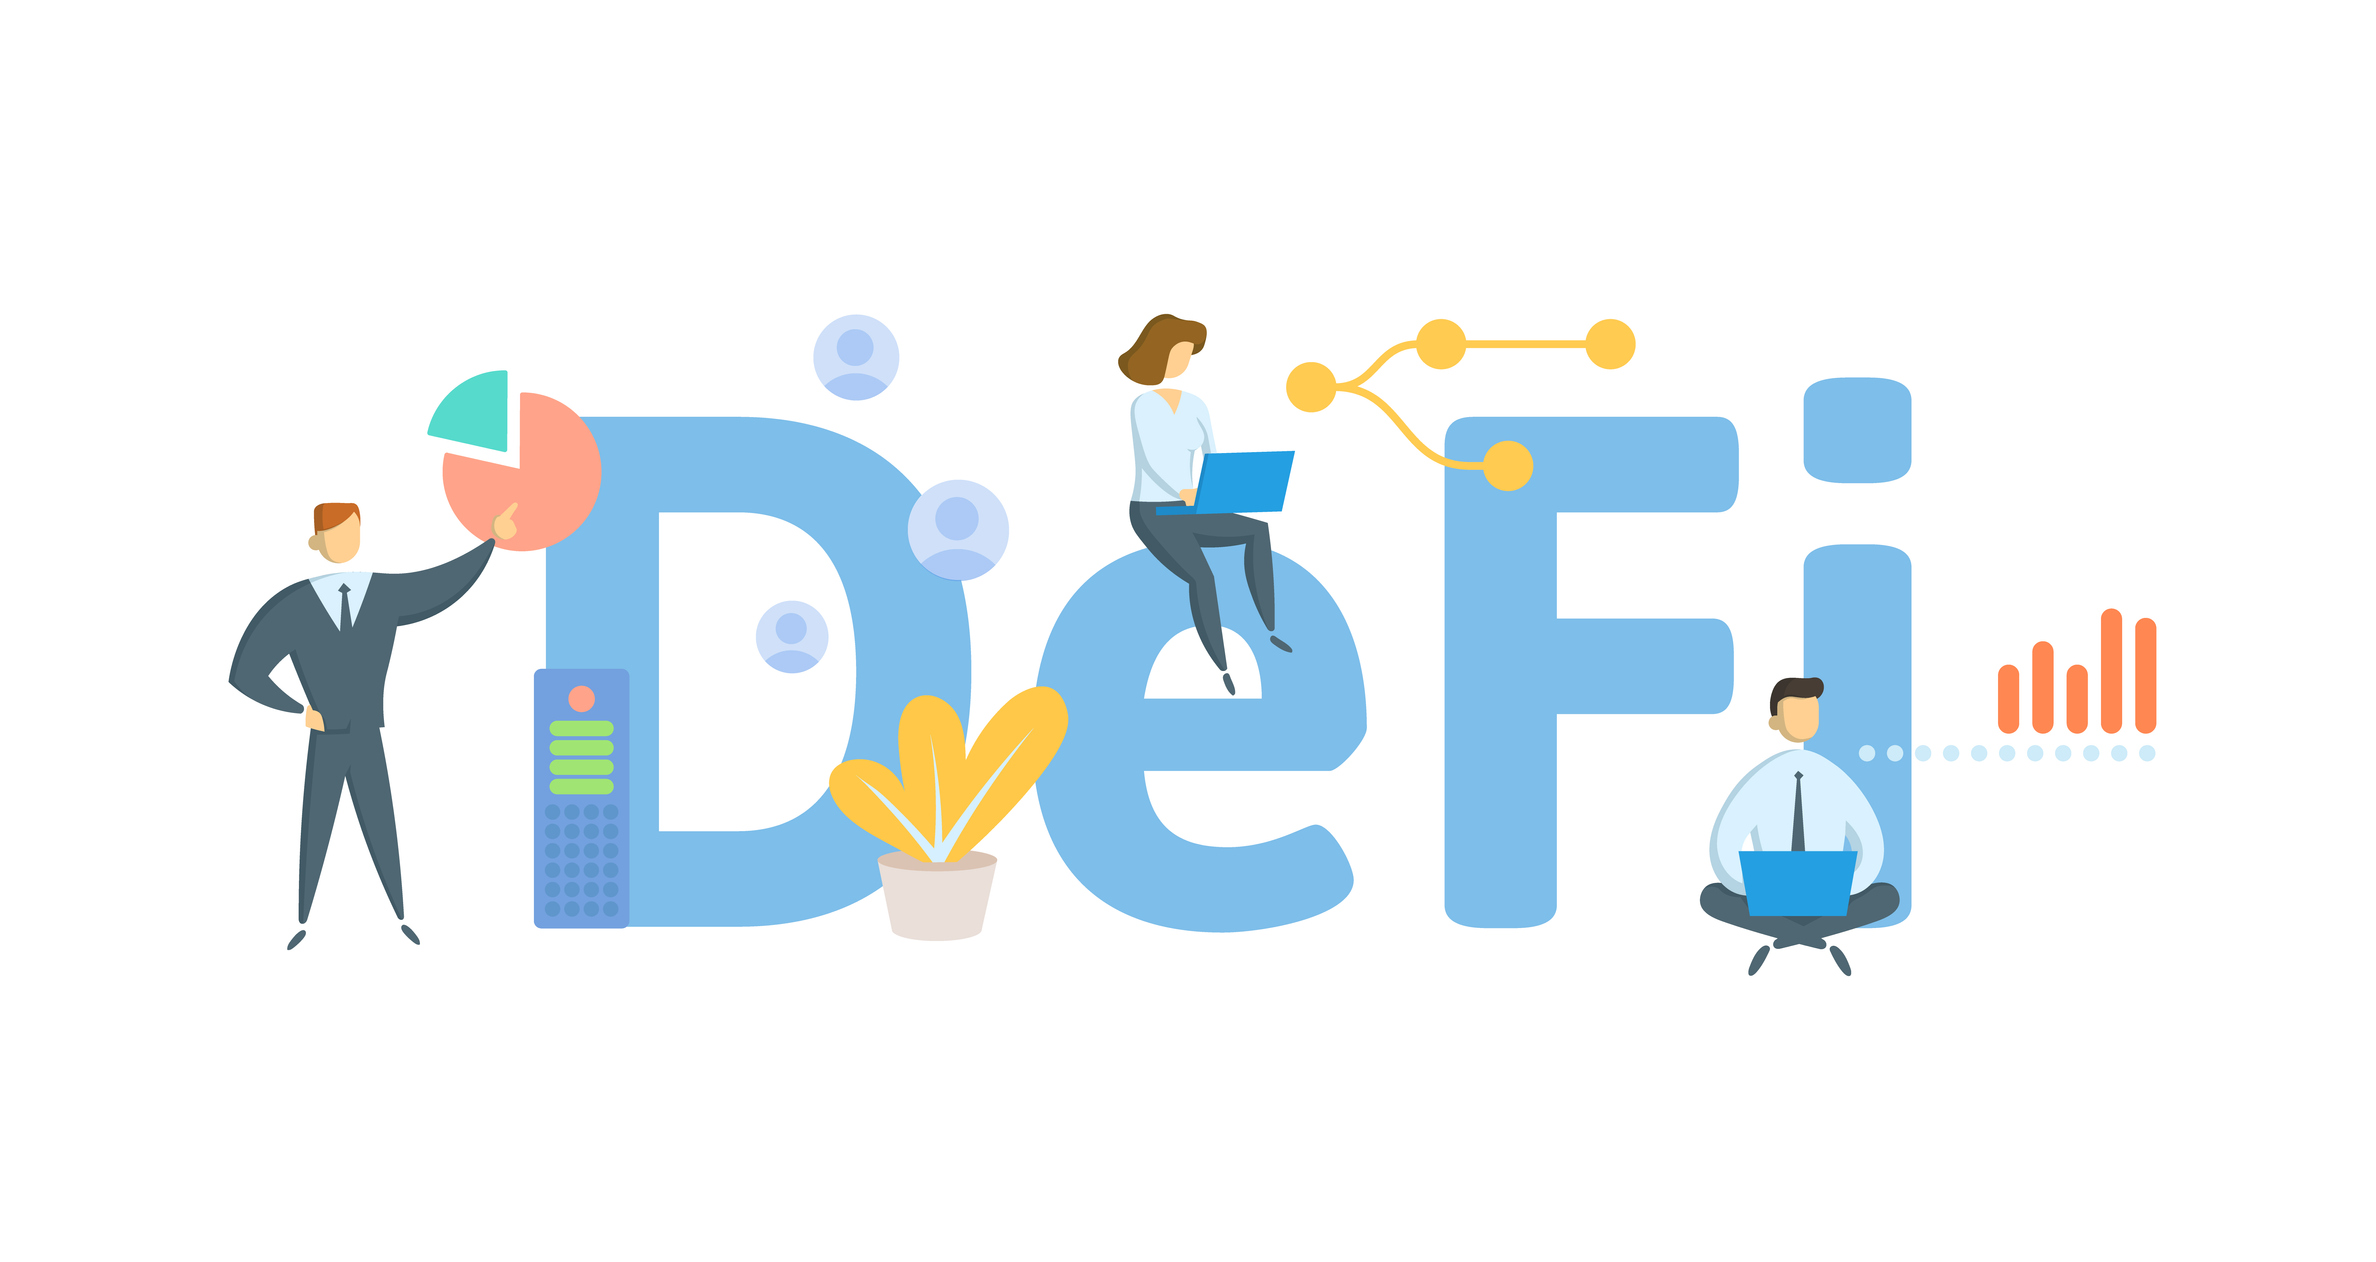 DeFi, Decentralized Finance. Concept with keyword, people and icons. Flat vector illustration. Isolated on white background.